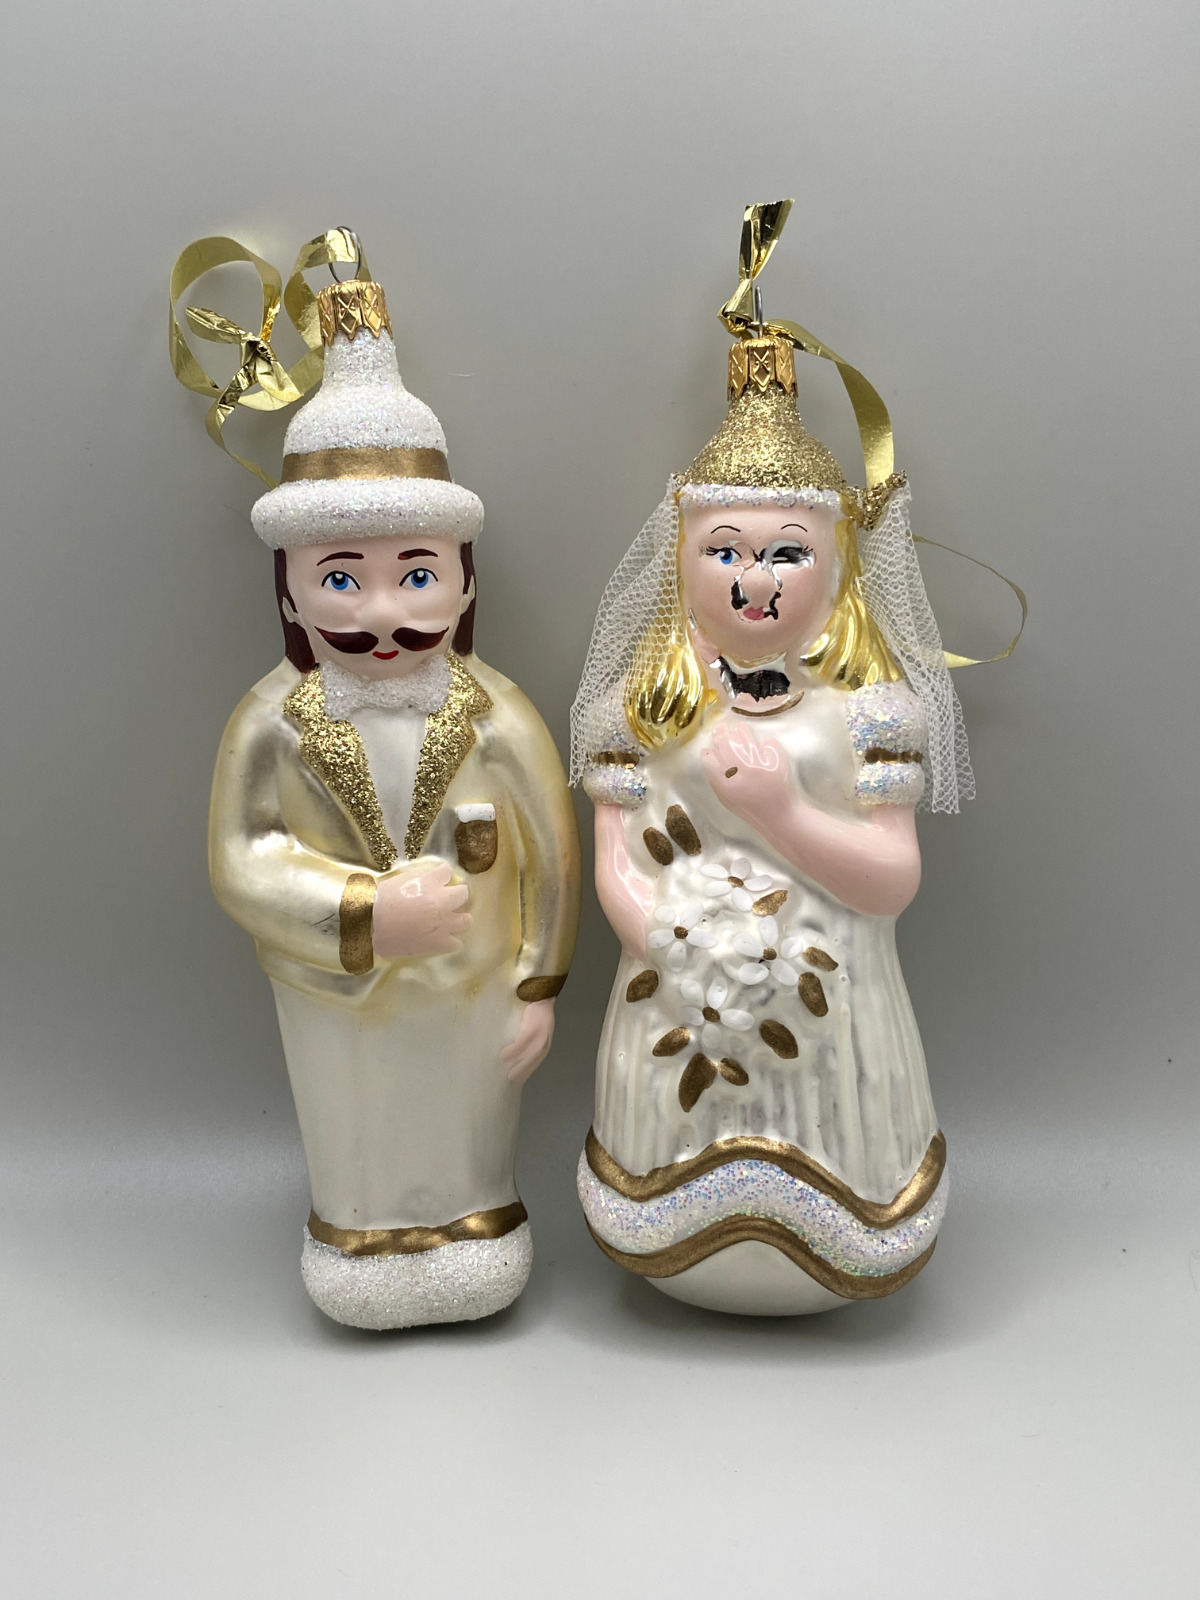 Vintage Blown Glass Bride and Groom Holiday Ornaments